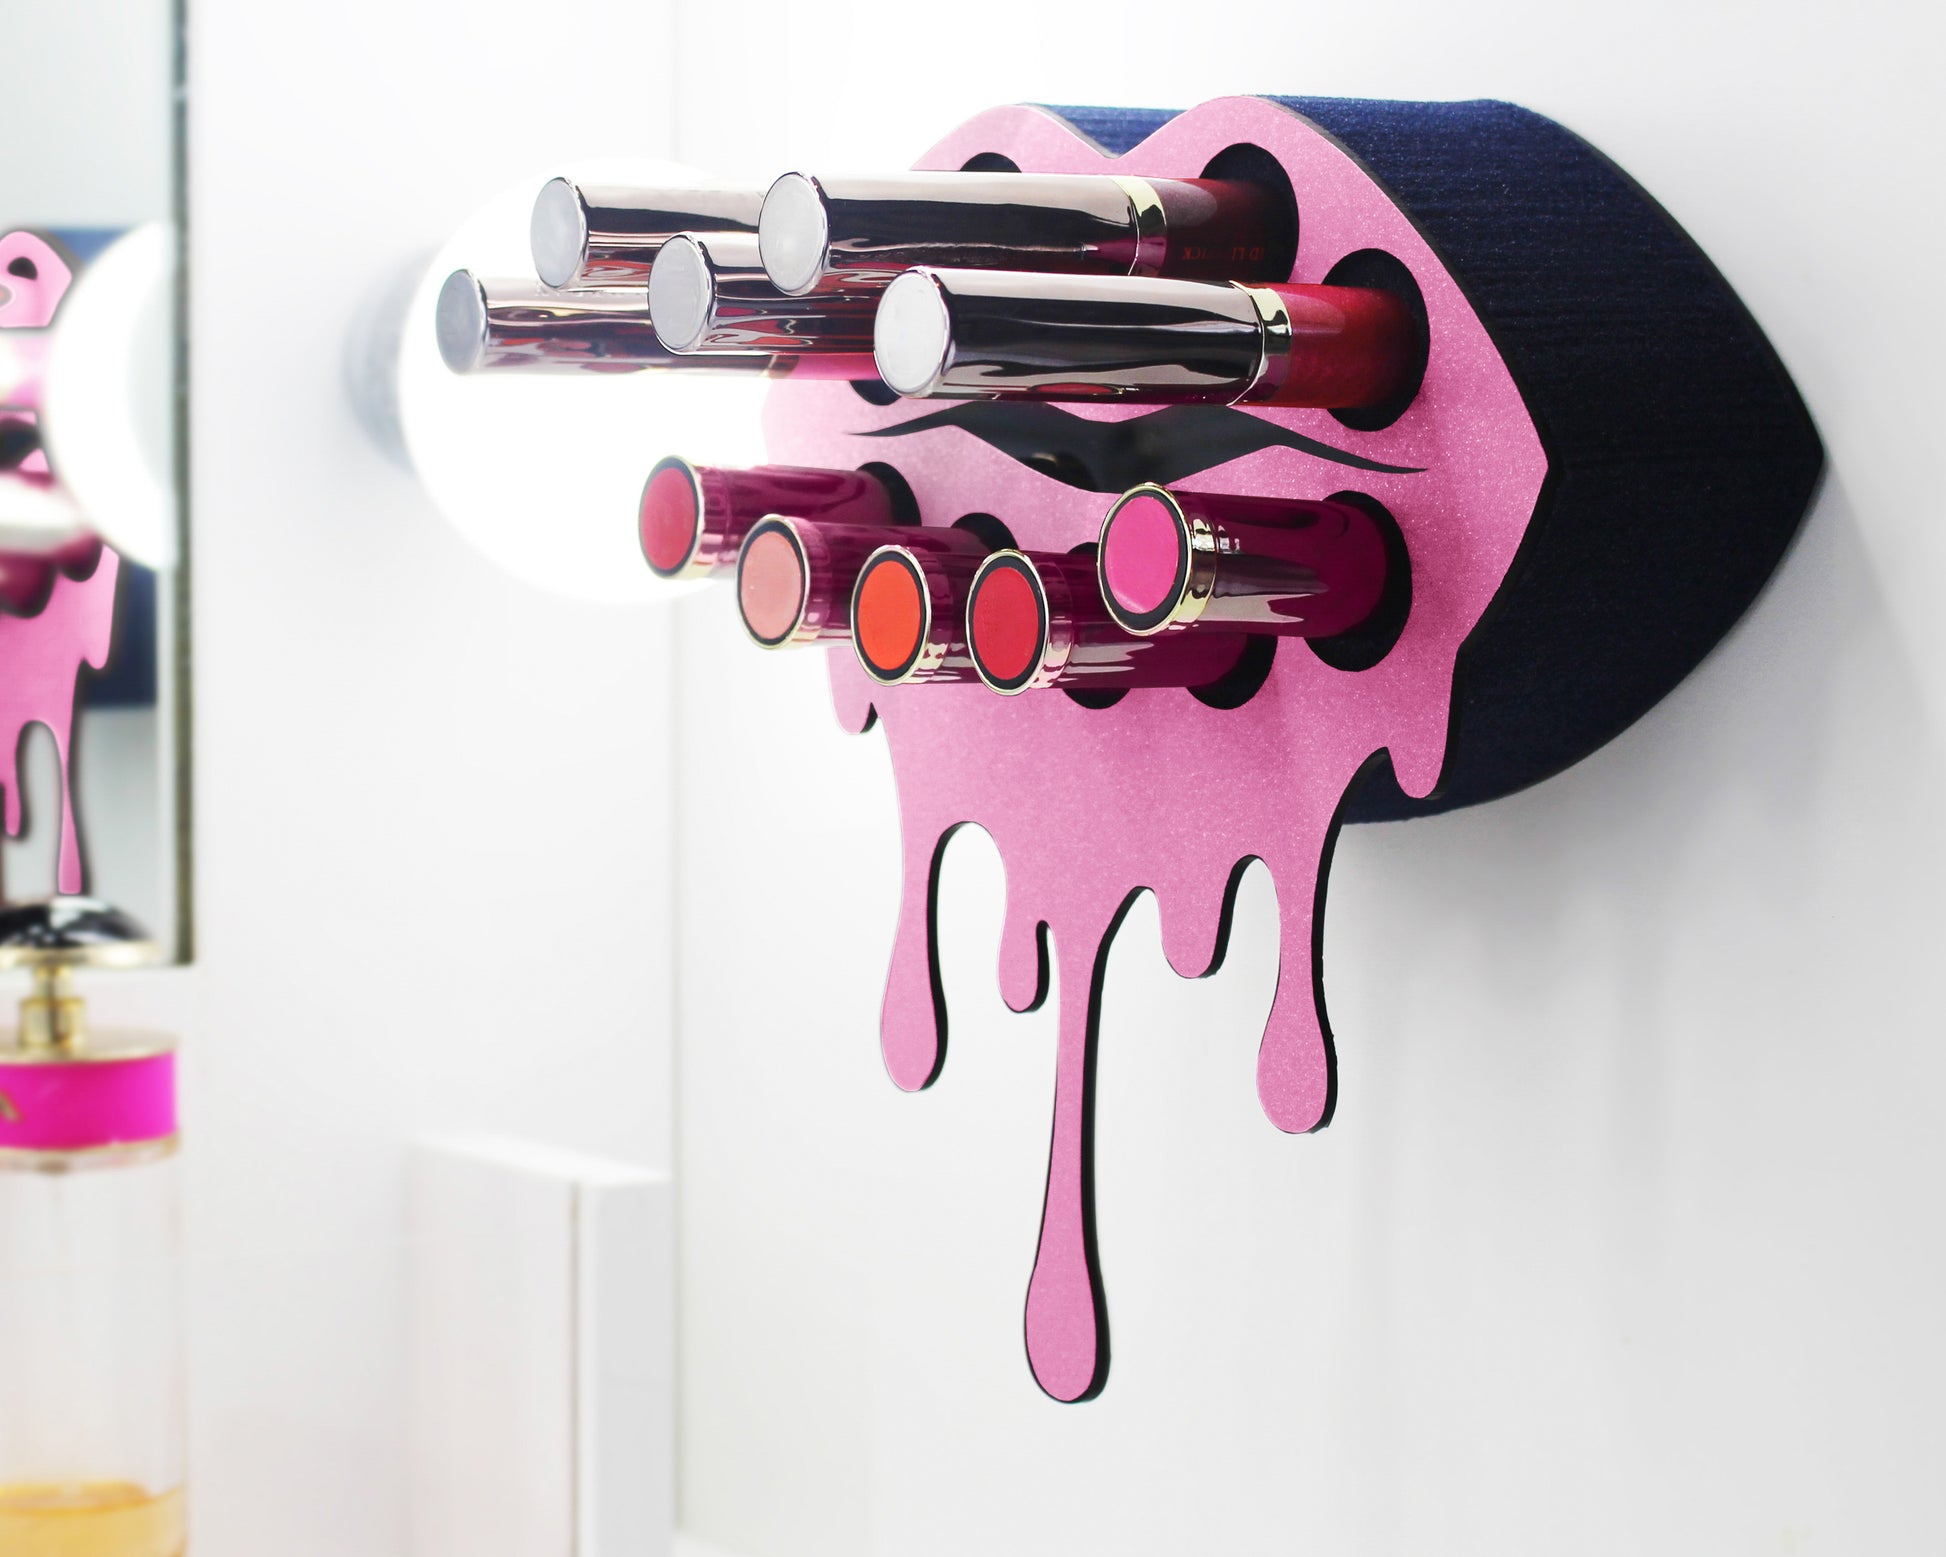 Small Lip Design Lipstick Organizer holding 10 lipsticks mounted on the wall with lipstick easily accessible and organized. Hanging Lipstick Holder that looks like wall art.